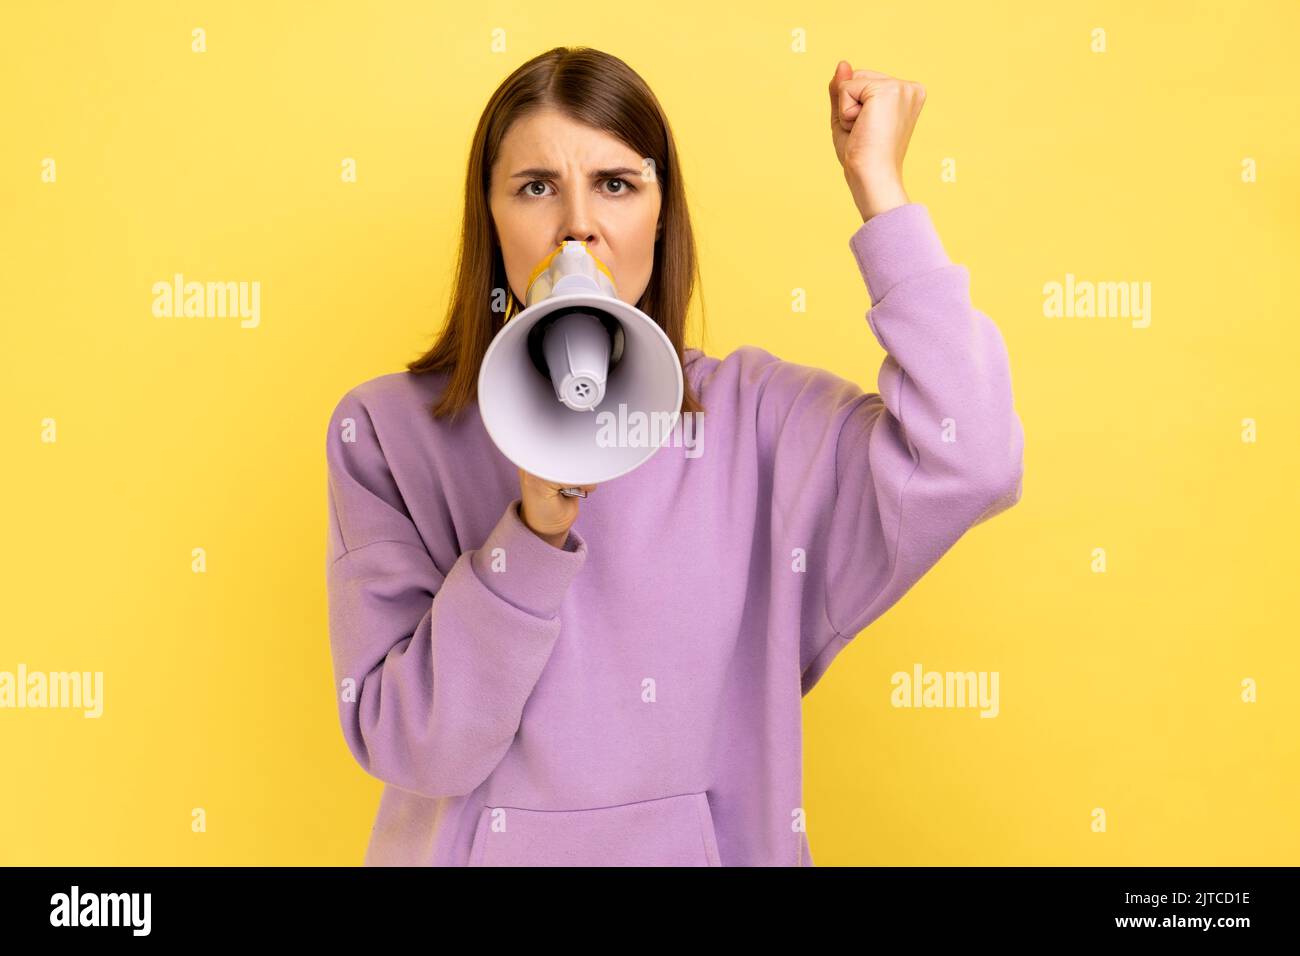 Portrait of woman holding megaphone near mouth, loudly speaking, screaming, making announcement with raised arm, protesting, wearing purple hoodie. Indoor studio shot isolated on yellow background. Stock Photo